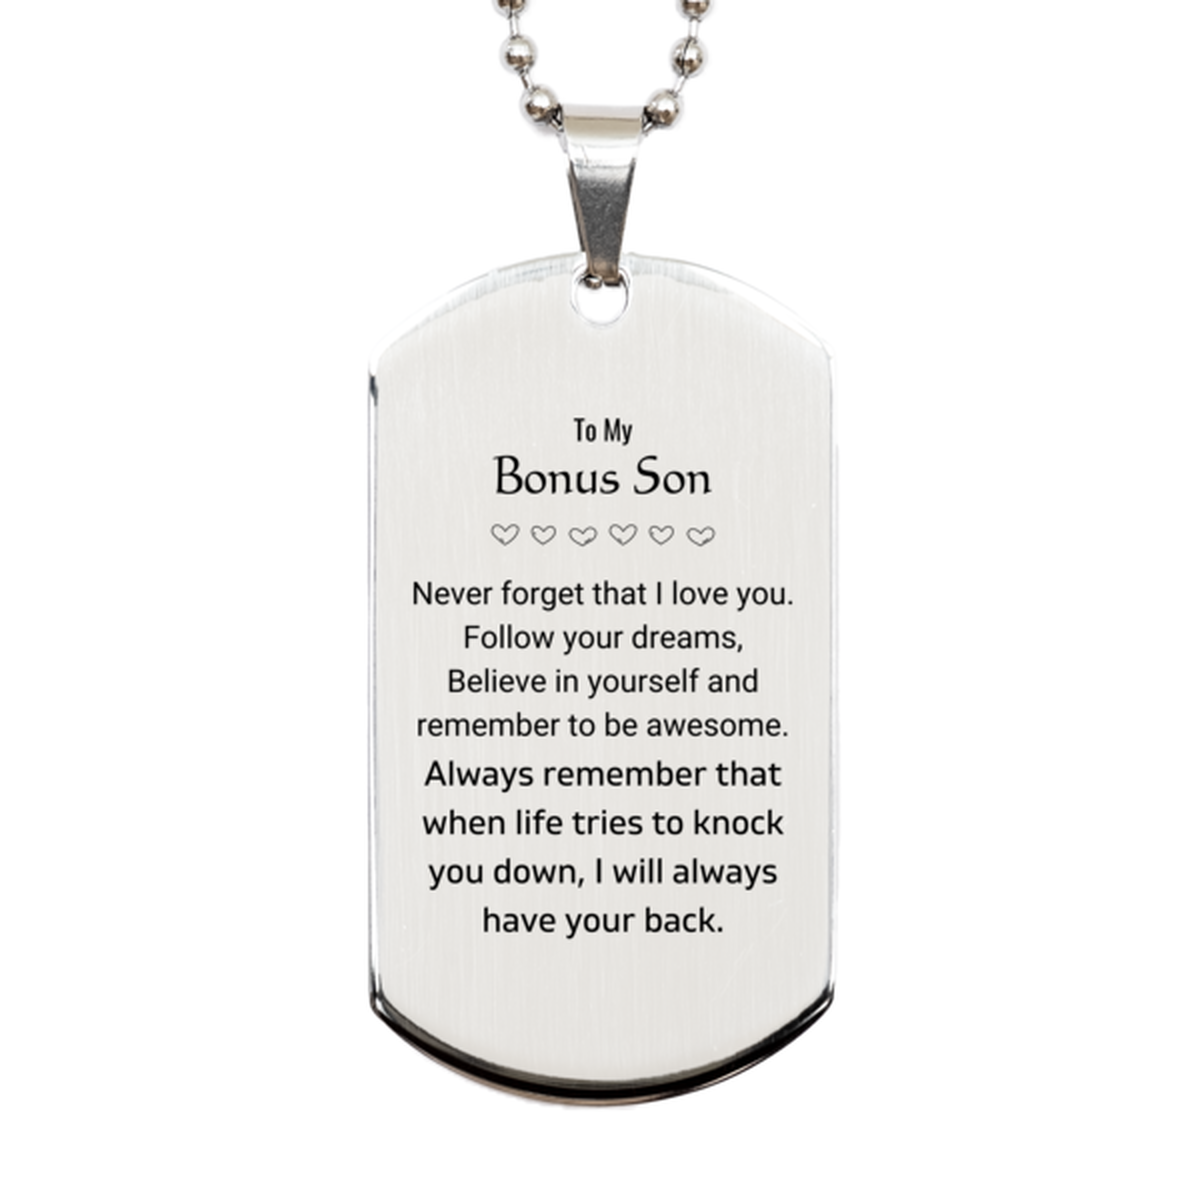 Inspirational Gifts for Bonus Son, Follow your dreams, Believe in yourself, Bonus Son Silver Dog Tag, Birthday Christmas Unique Gifts For Bonus Son